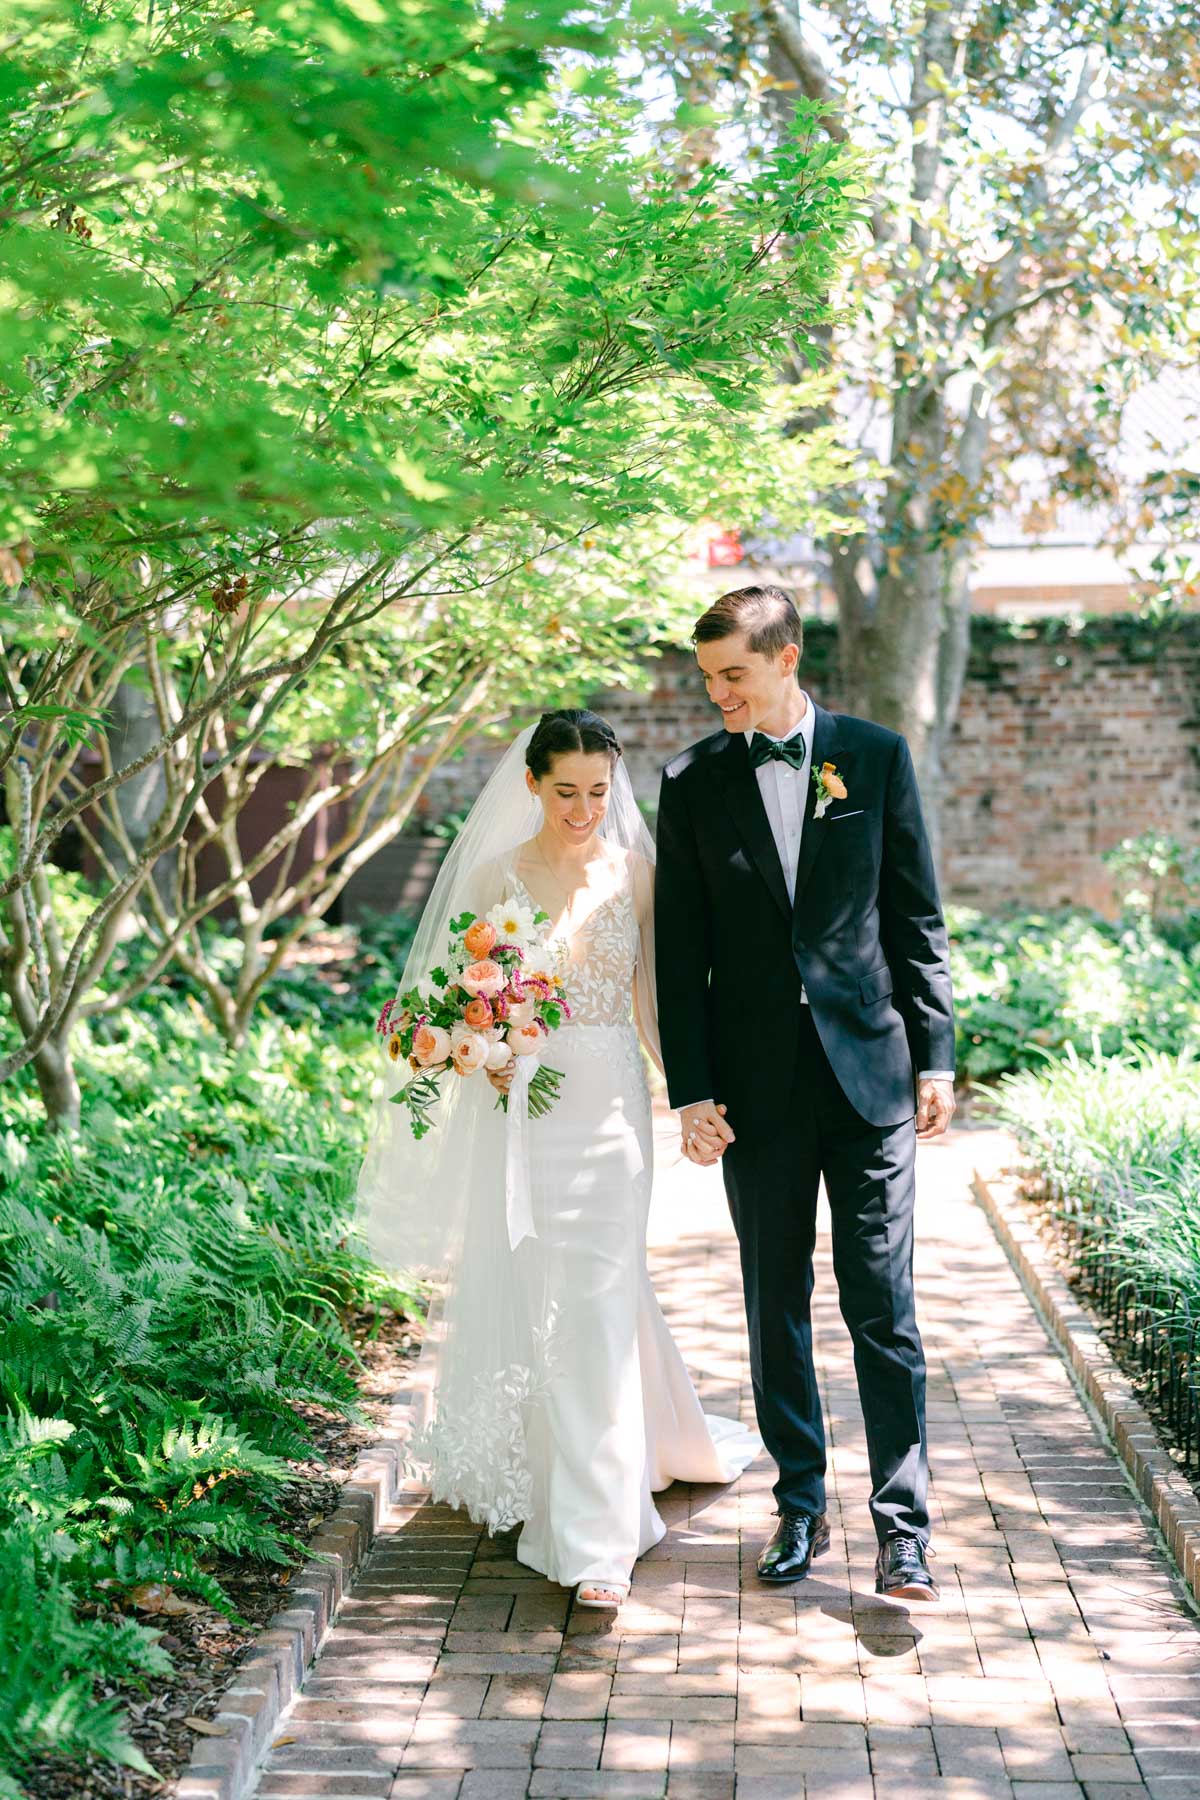 A bride and groom walk together in a courtyard in Charleston, SC